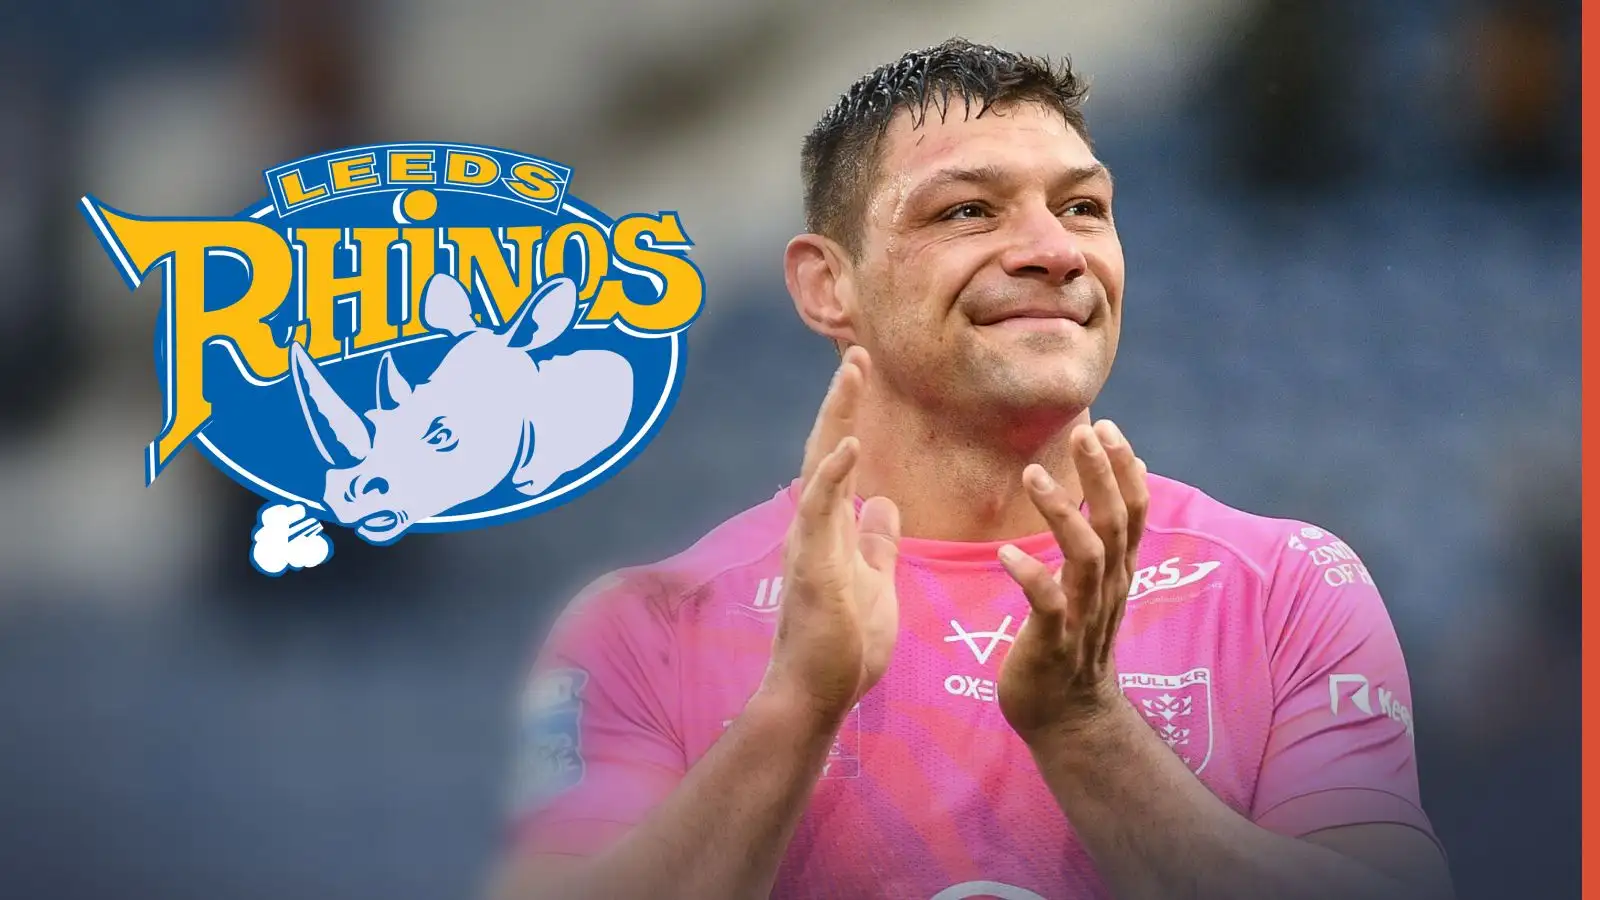 Ryan Hall to play final season with Leeds Rhinos with future off-field role explained